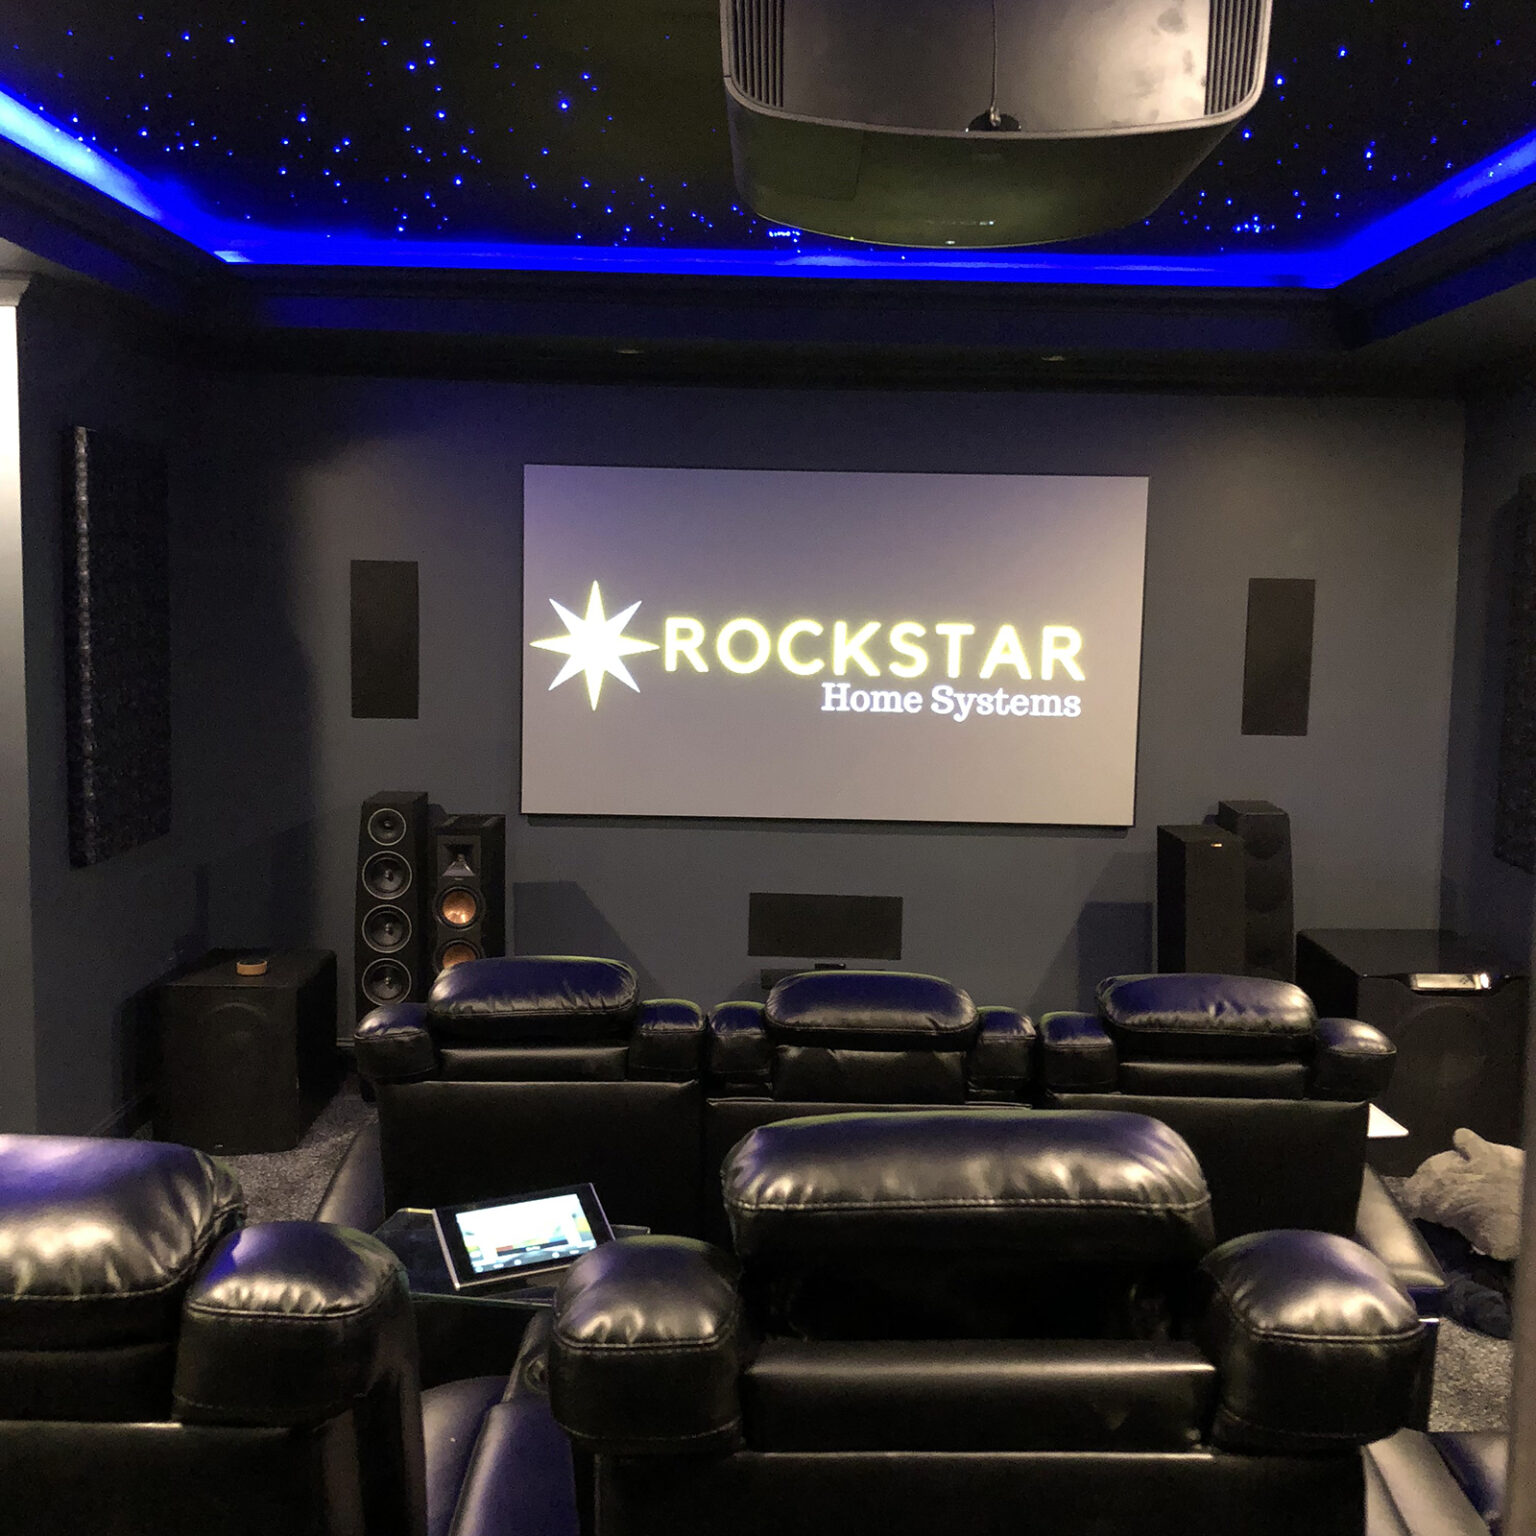 Contact Rockstar Home Systems